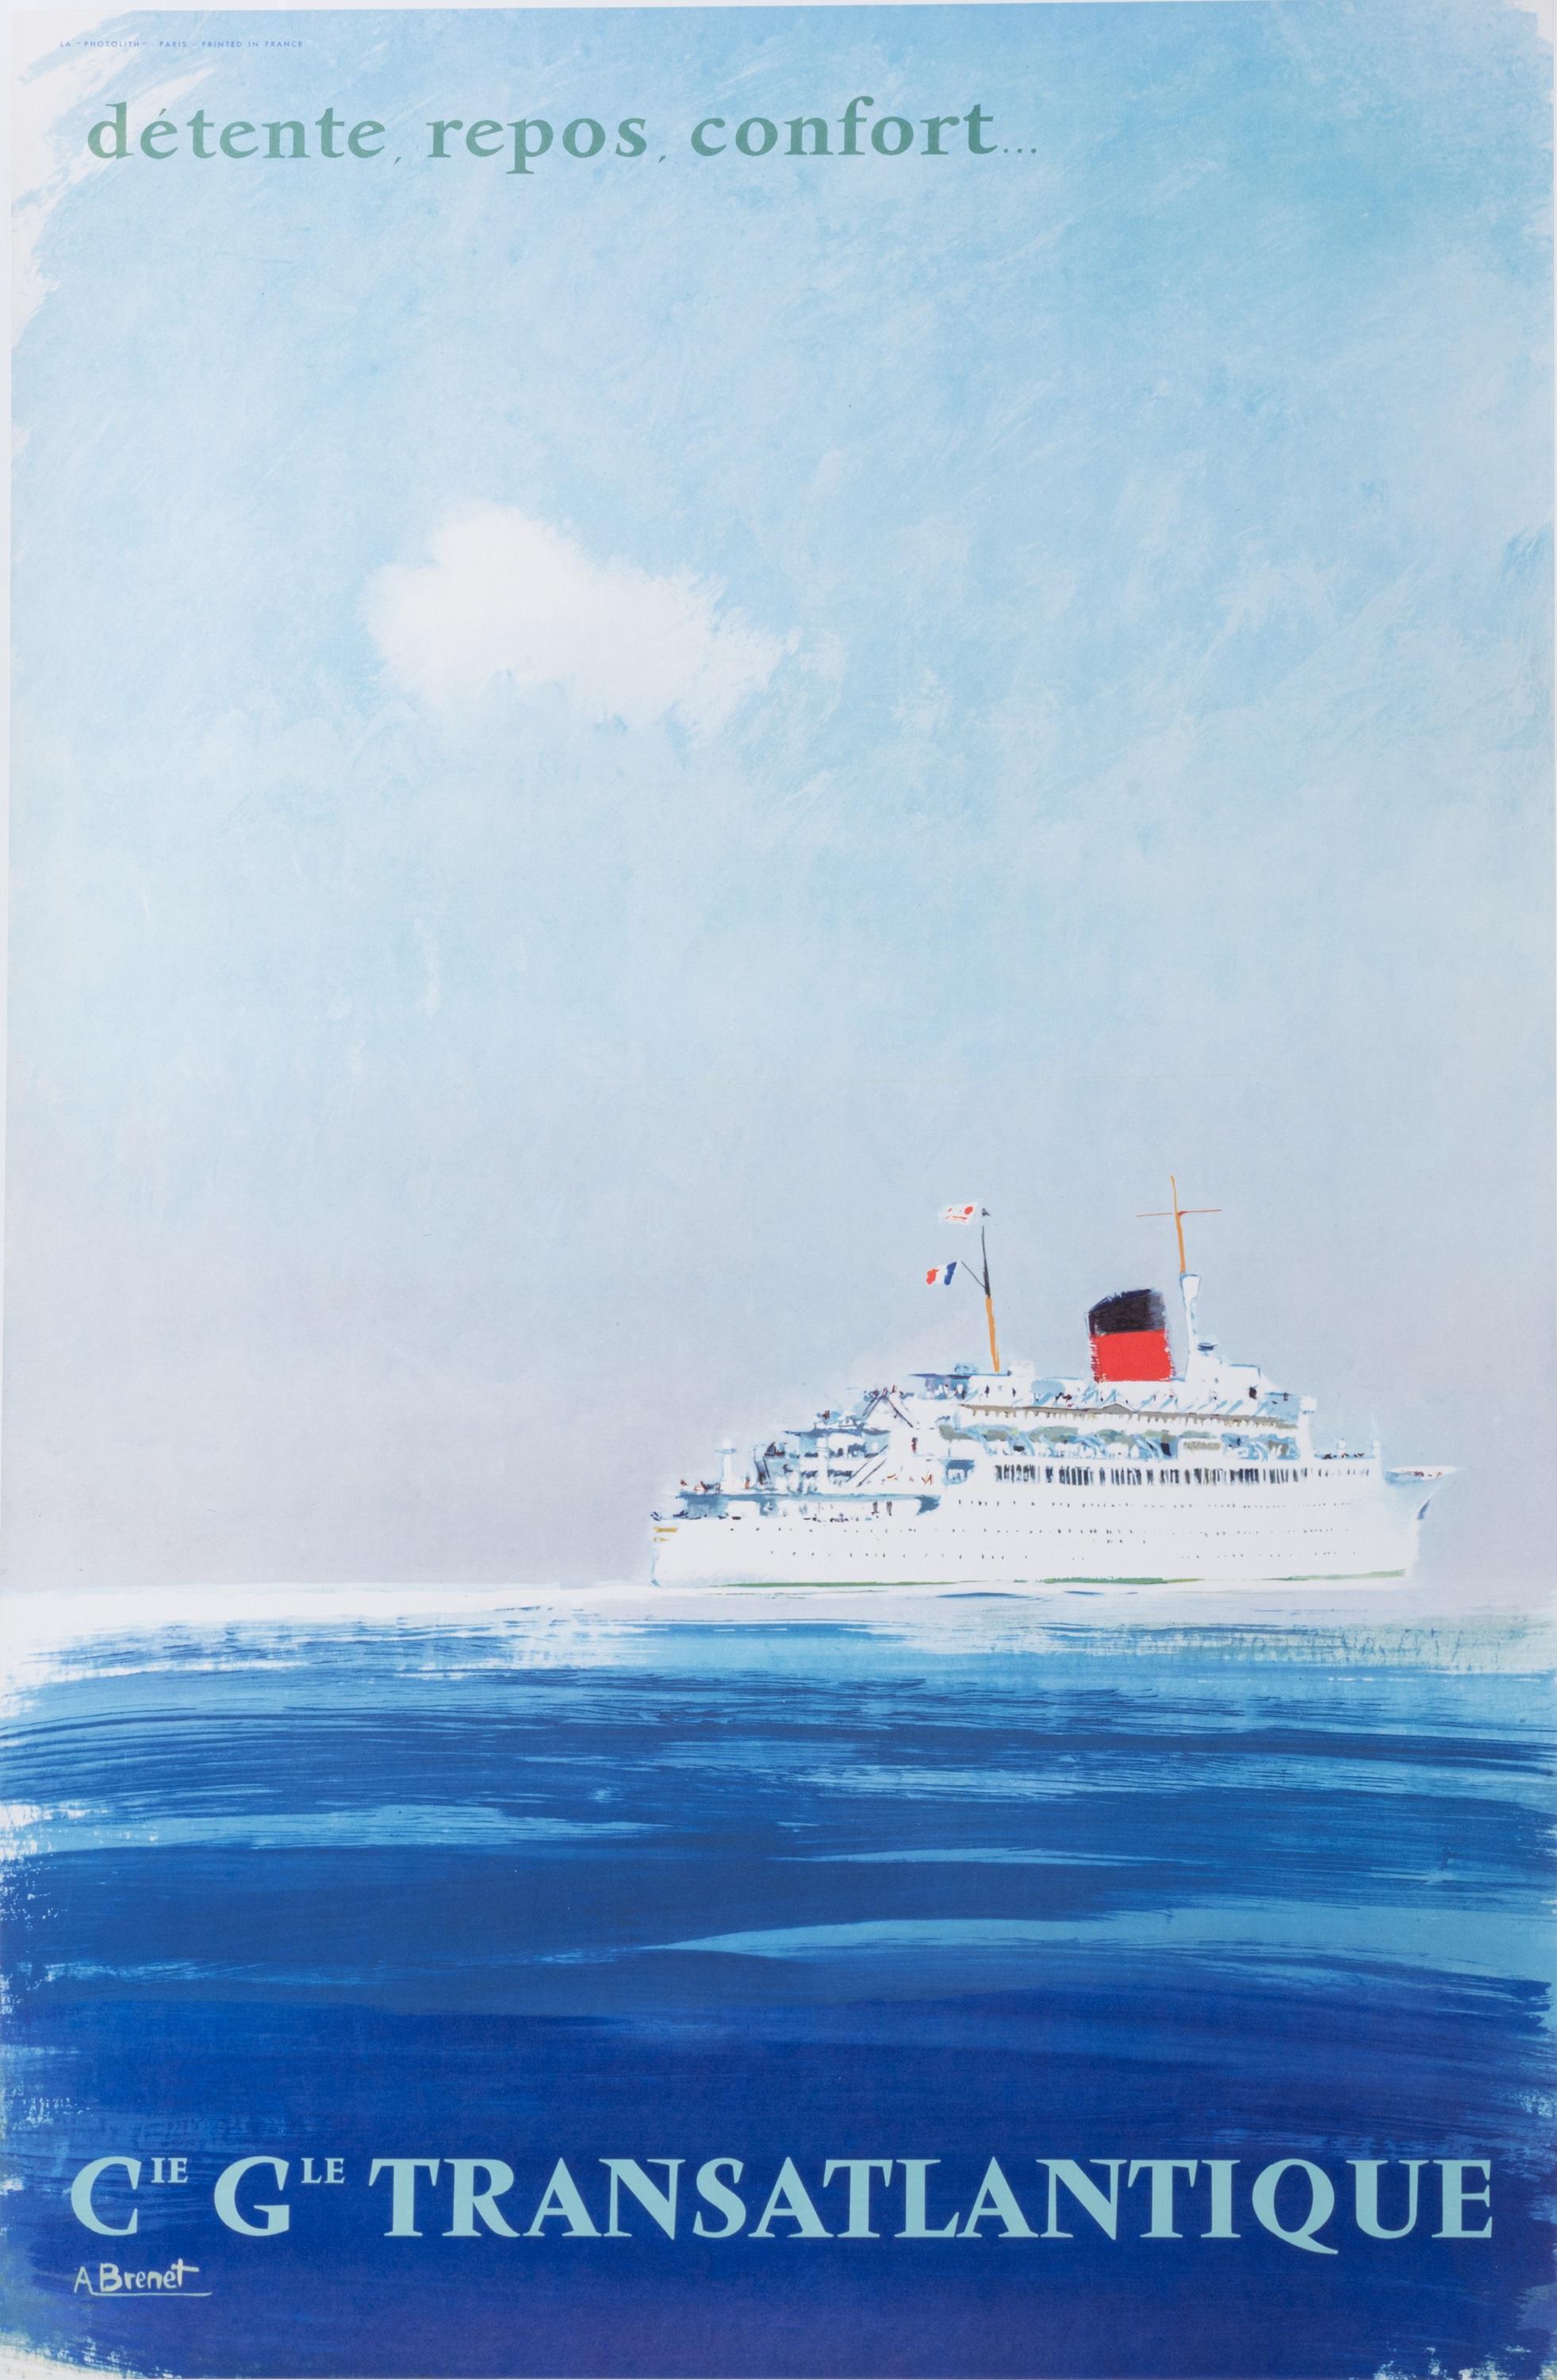 This poster by Brenet created circa 1950 was produced to promote tourism by boat via the Compagnie Générale Transatlantique. 

Artist : Albert Brenet (1903 - 2005)
Title : Compagnie Générale Transatlantique - Repos - Détente - Confort
Date : circa